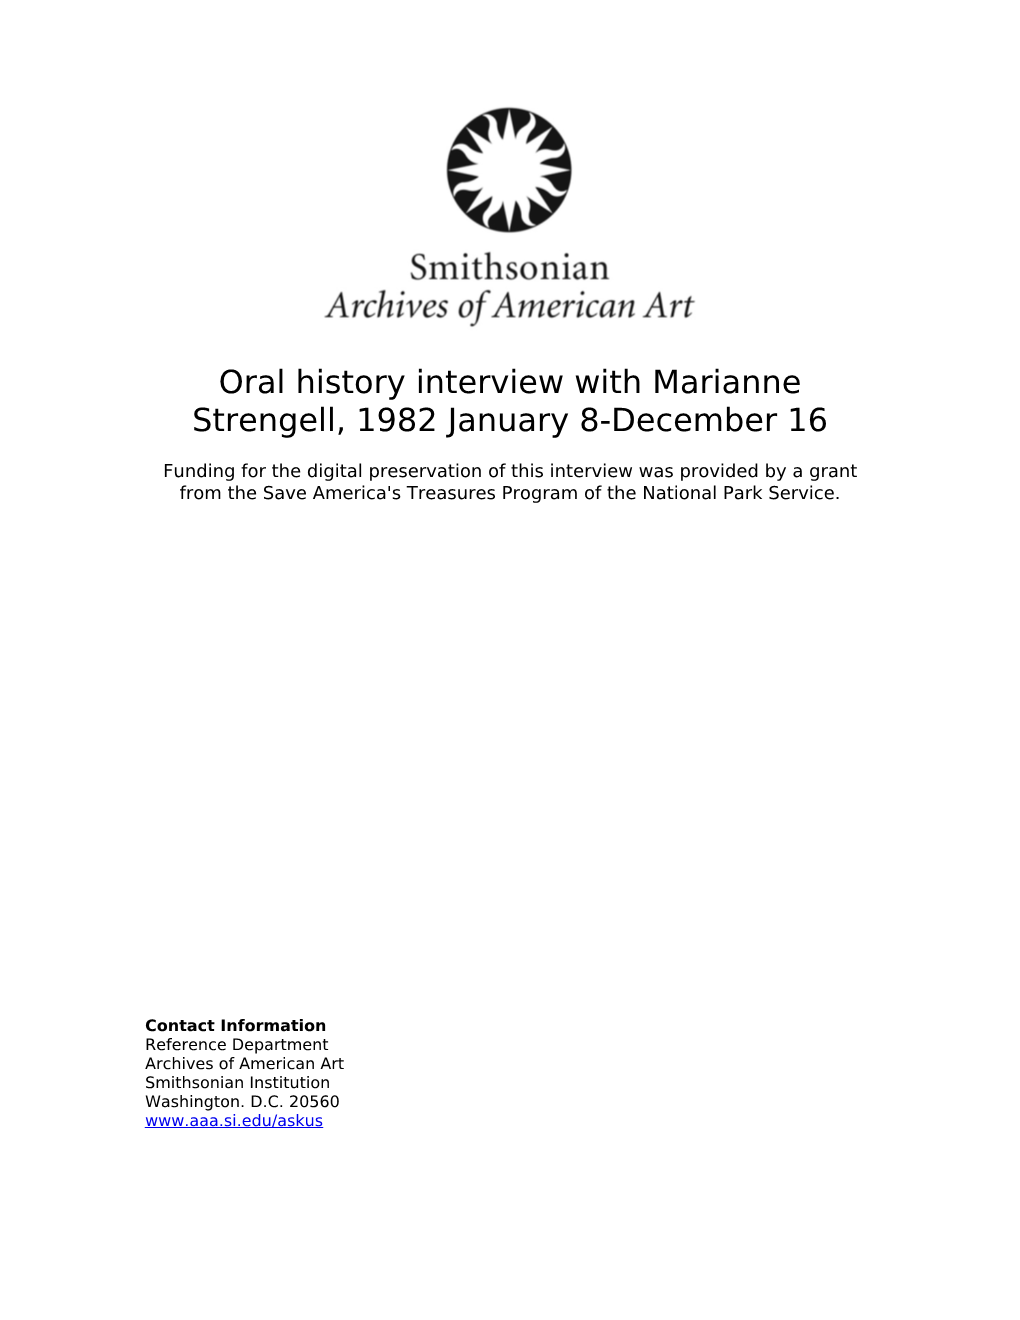 Oral History Interview with Marianne Strengell, 1982 January 8-December 16